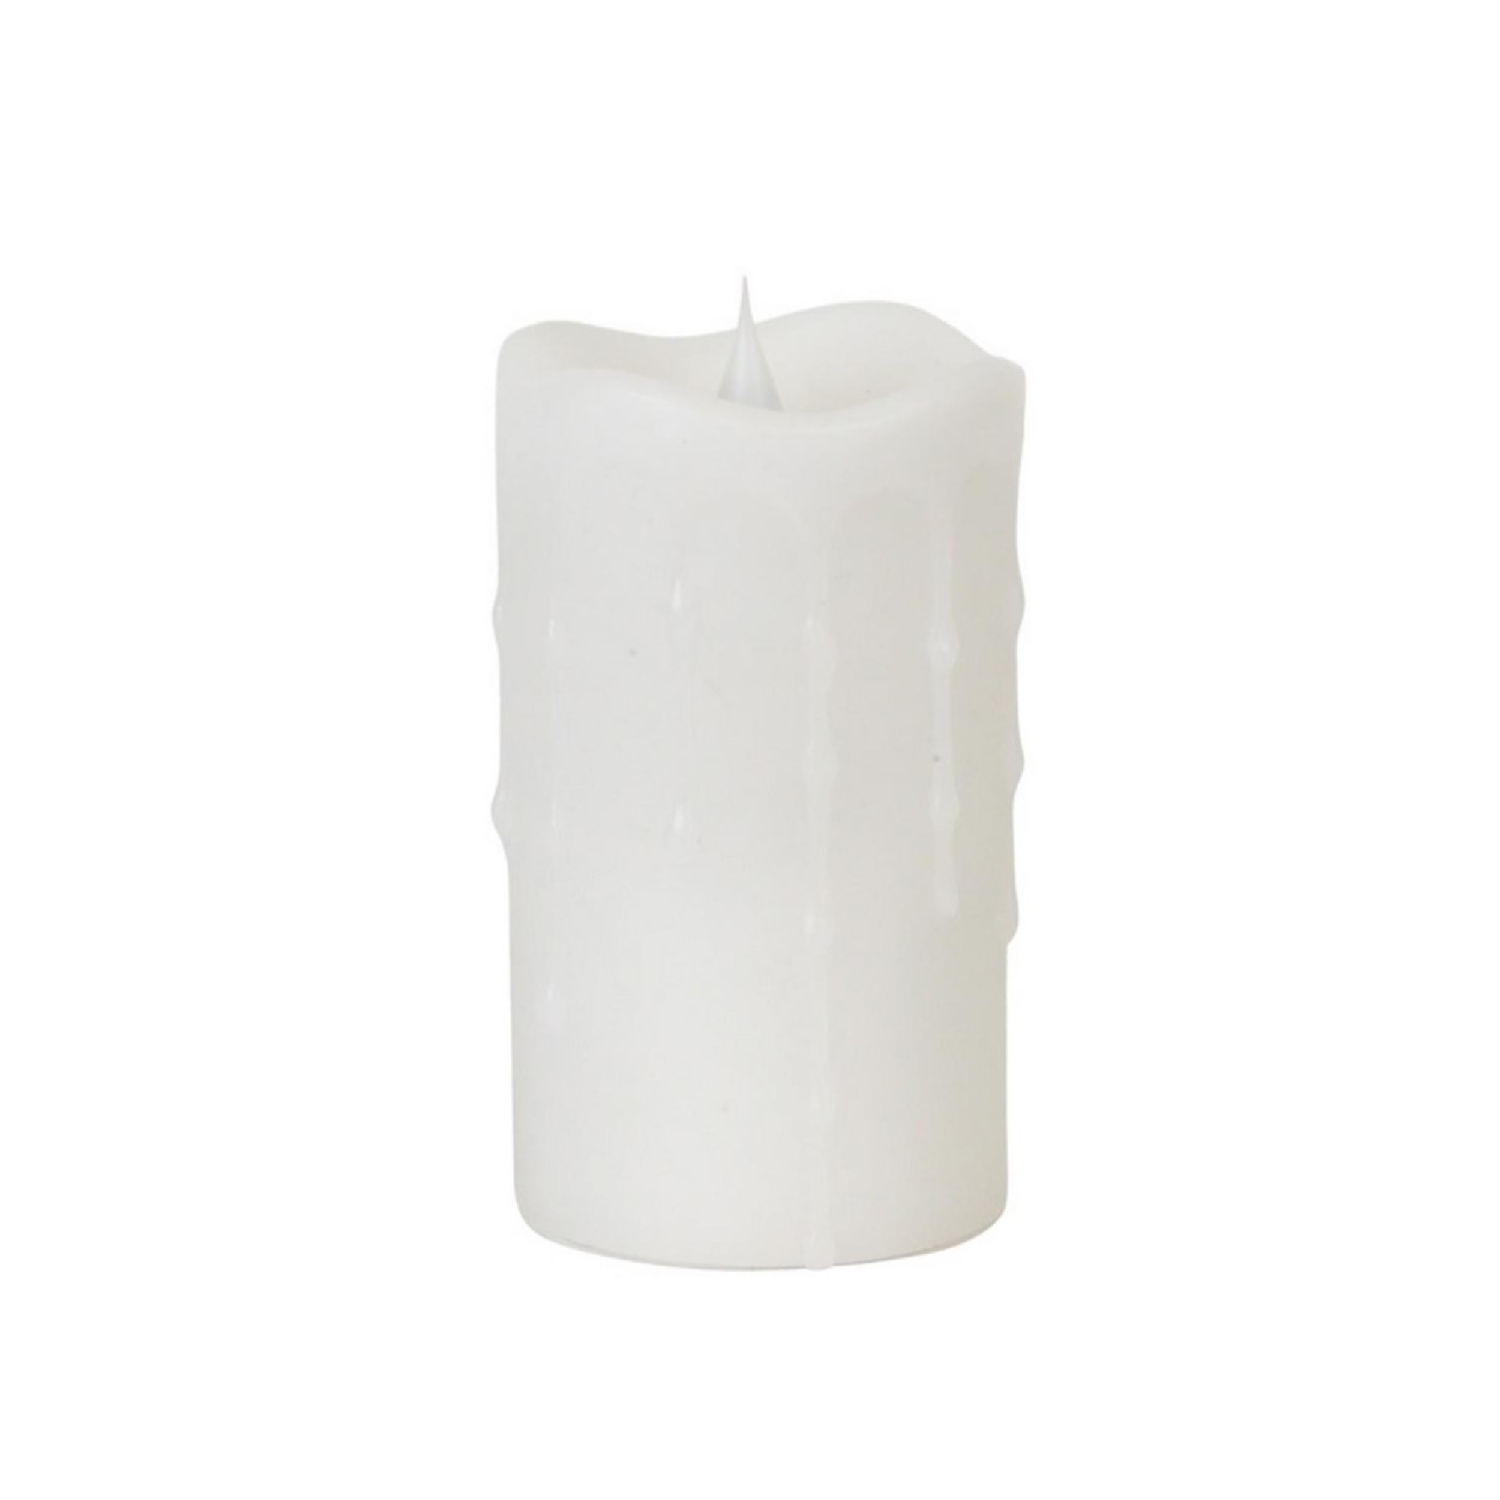 5.25" Pre-Lit White Battery Operated Flameless LED Pillar Candle